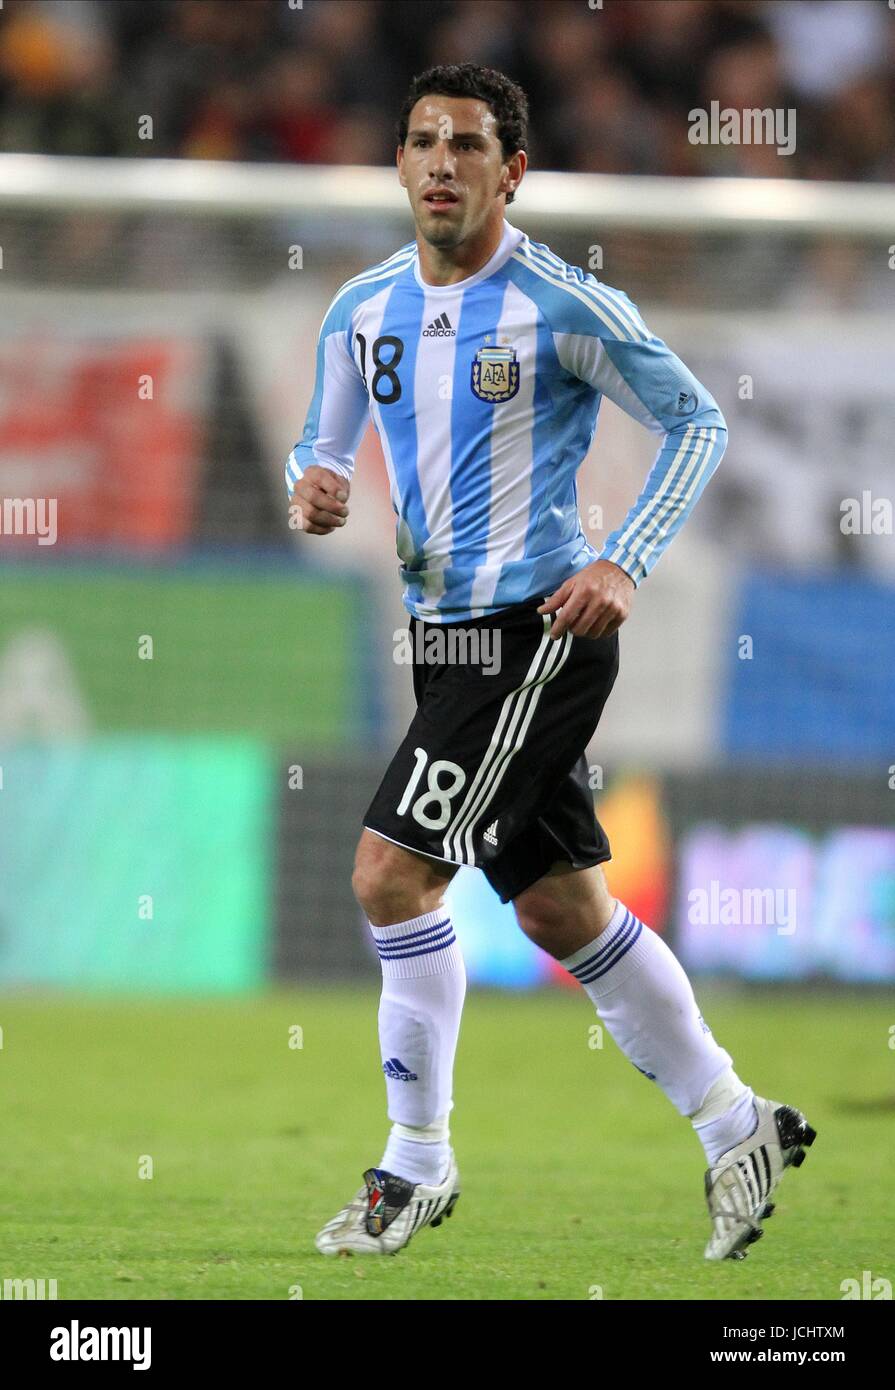 MAXIMILIANO RODRIGUEZ ARGENTINA & ATLETICO MADRID SPAIN V ARGENTINA ESTADIO VICENTE CADERON, MADRID, SPAIN 14 November 2009 GAA3744     WARNING! This Photograph May Only Be Used For Newspaper And/Or Magazine Editorial Purposes. May Not Be Used For, Internet/Online Usage Nor For Publications Involving 1 player, 1 Club Or 1 Competition, Without Written Authorisation From Football DataCo Ltd. For Any Queries, Please Contact Football DataCo Ltd on +44 (0) 207 864 9121 Stock Photo